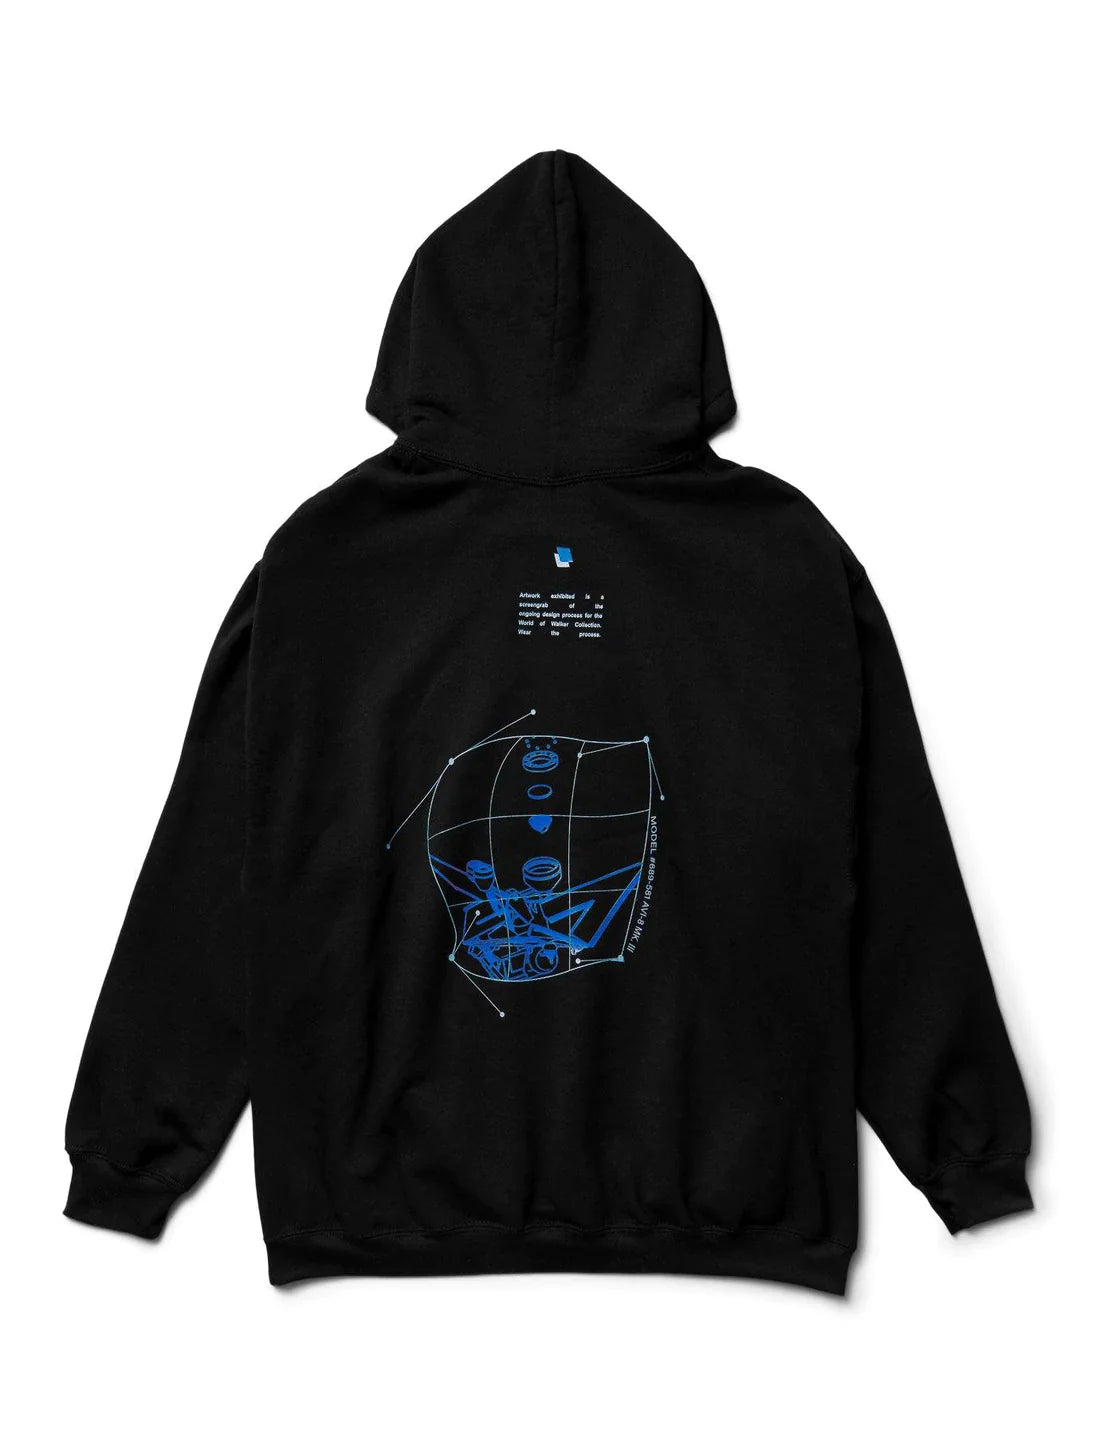 Rear view of an Alan Walker Blueprint Hoodie in black, showcasing a large blue schematic design of a protective mask on the back, with accompanying technical text and the signature Alan Walker logo at the top.